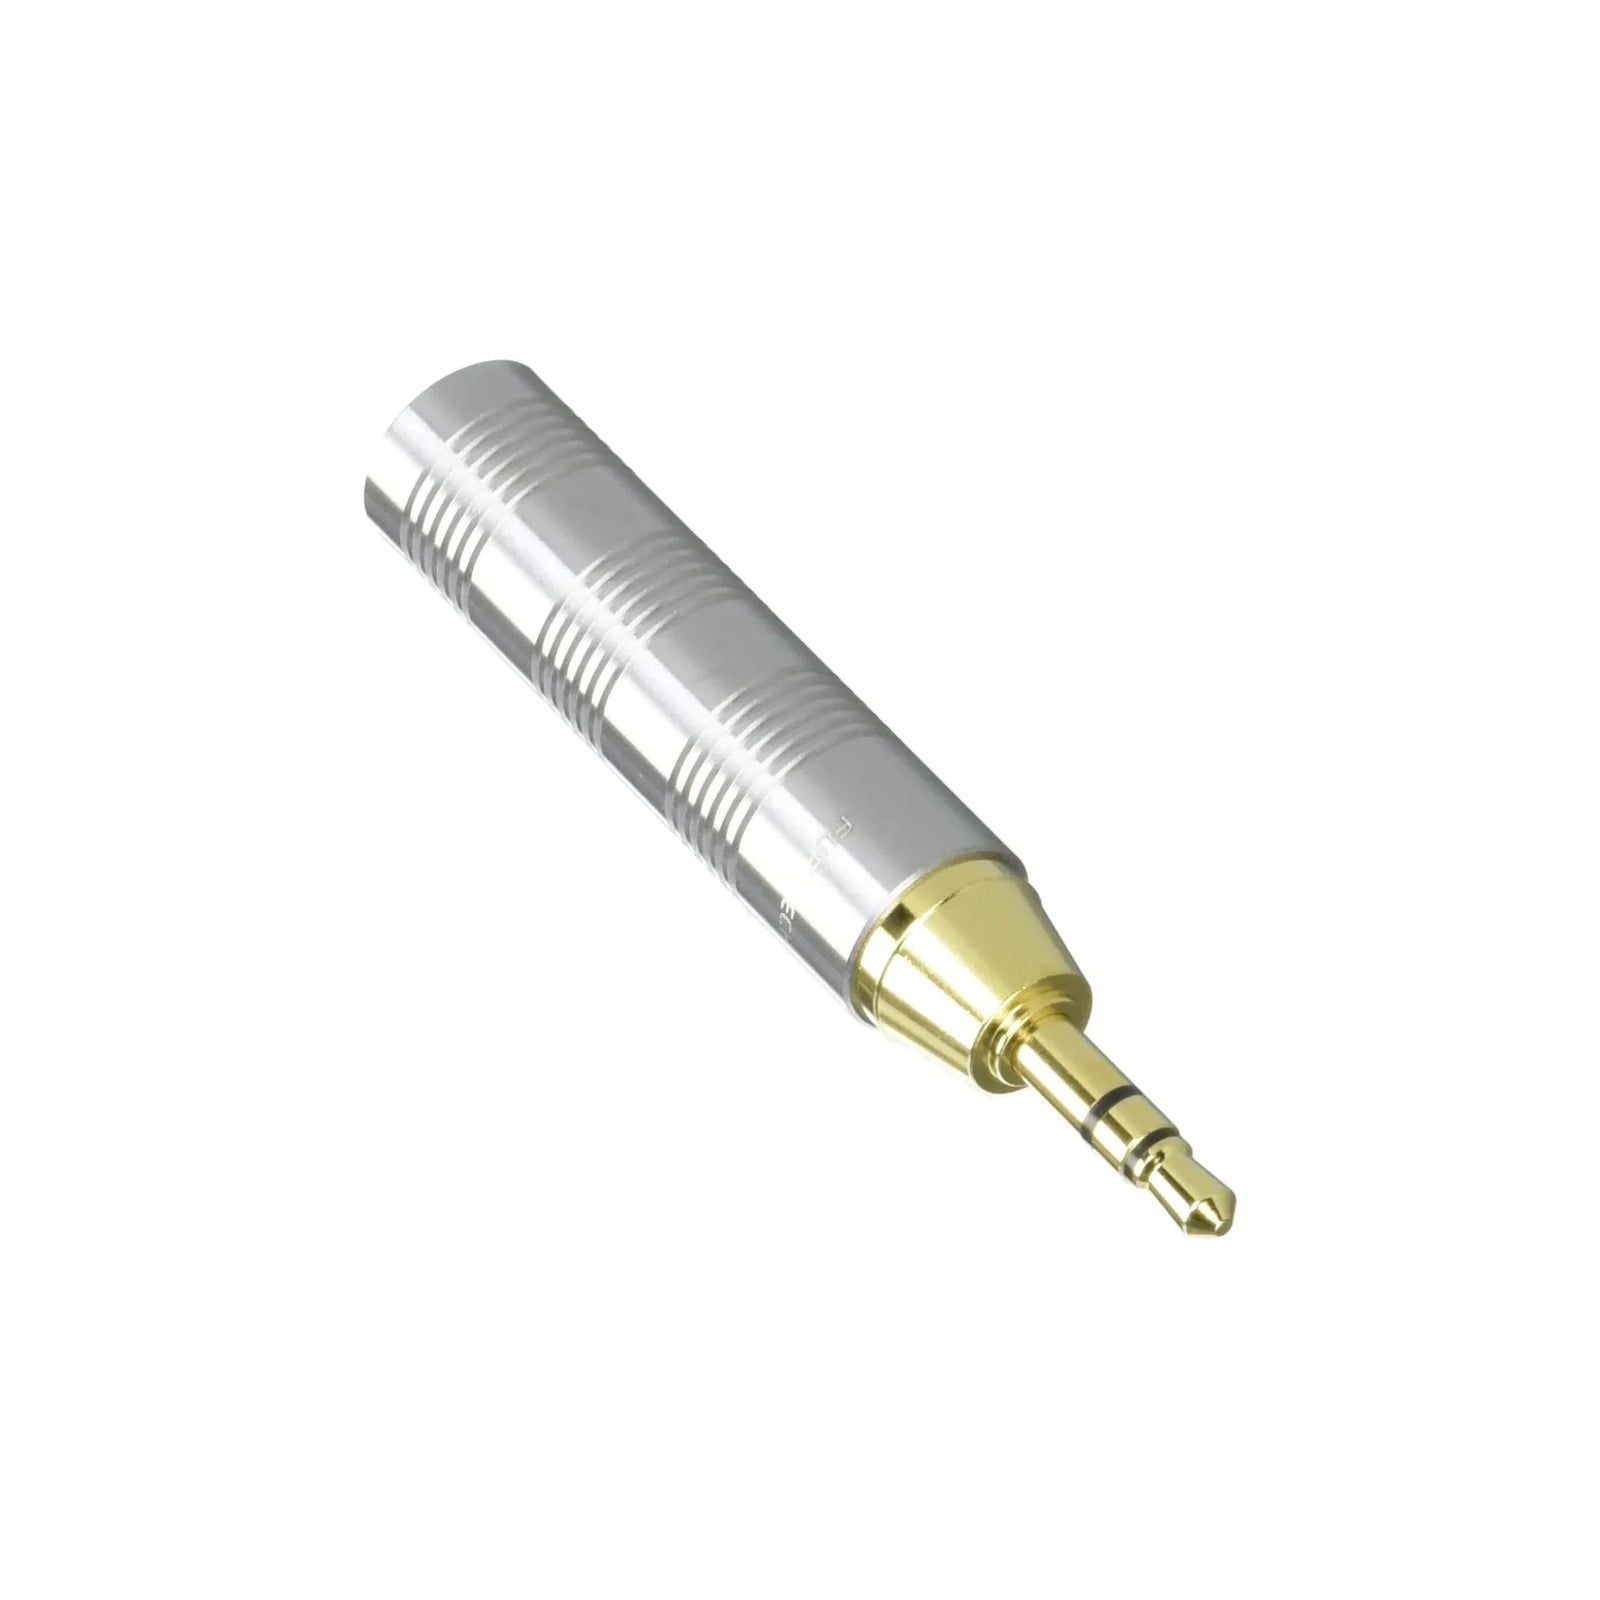 ALPHA DESIGN LABS ADAPTORS F35(G) Headphone Jack Stereo Adapter 6.3mm to 3.5mm 24K Gold Plated Available at Vinyl Sound